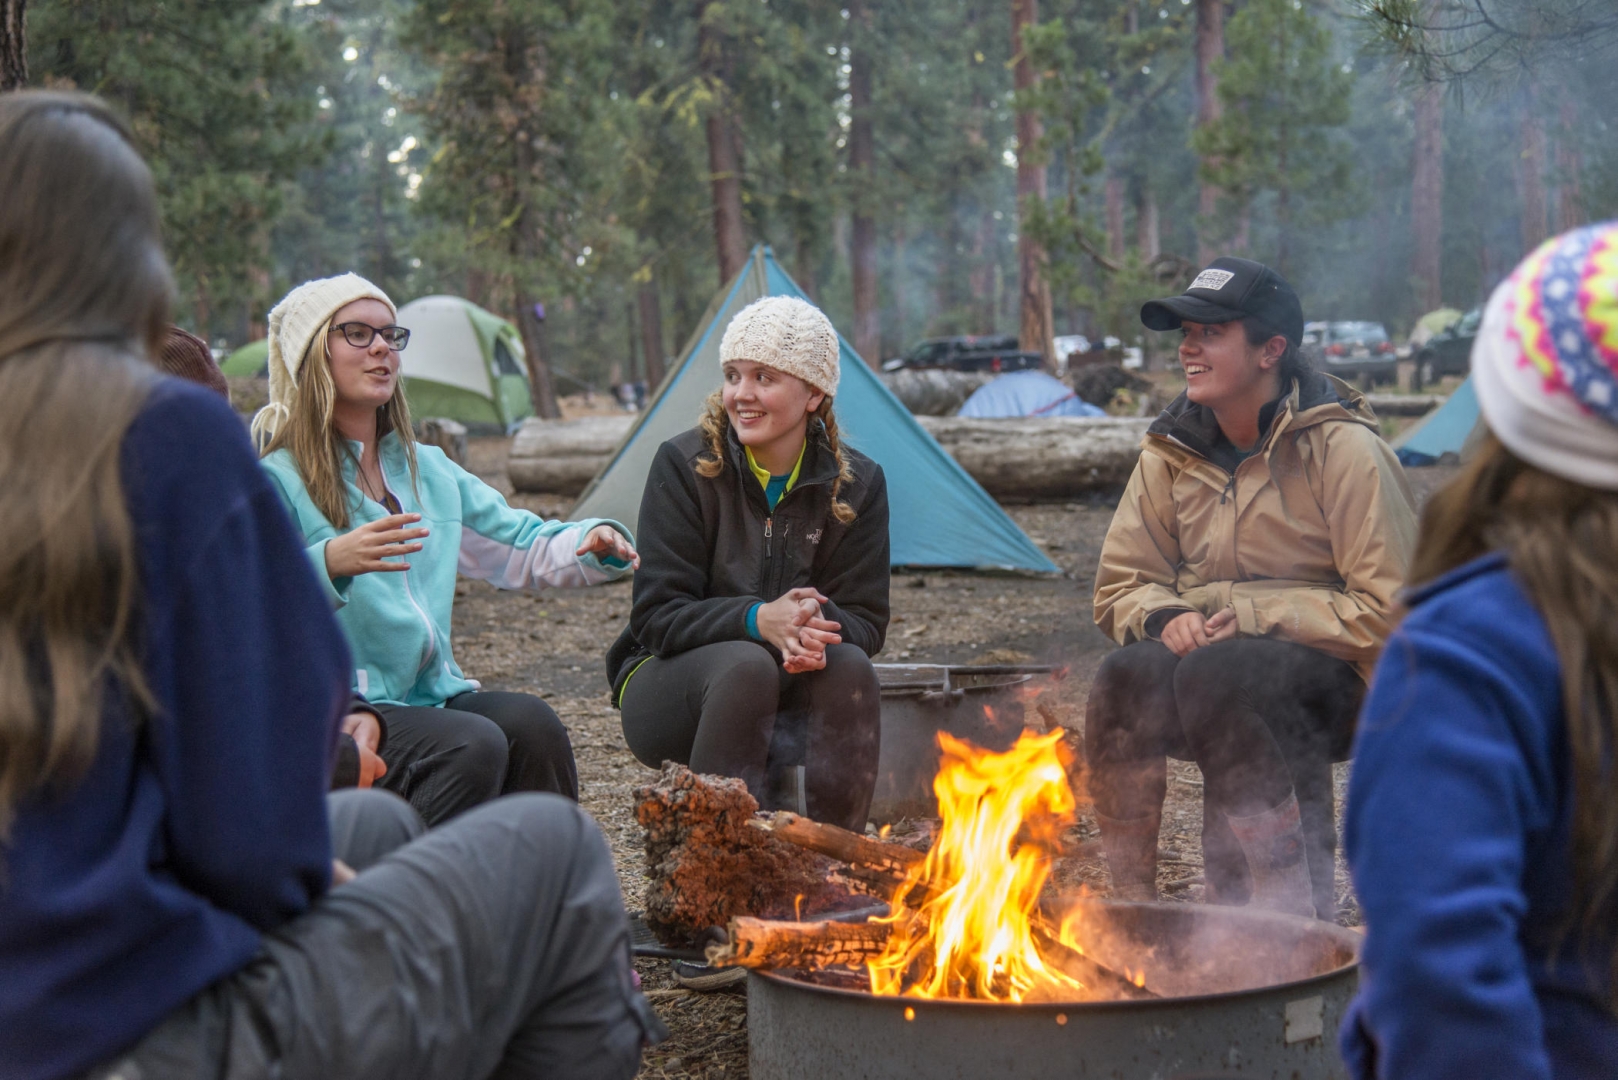 Students tell stories and laugh around a camp fire, with their tents behind them.